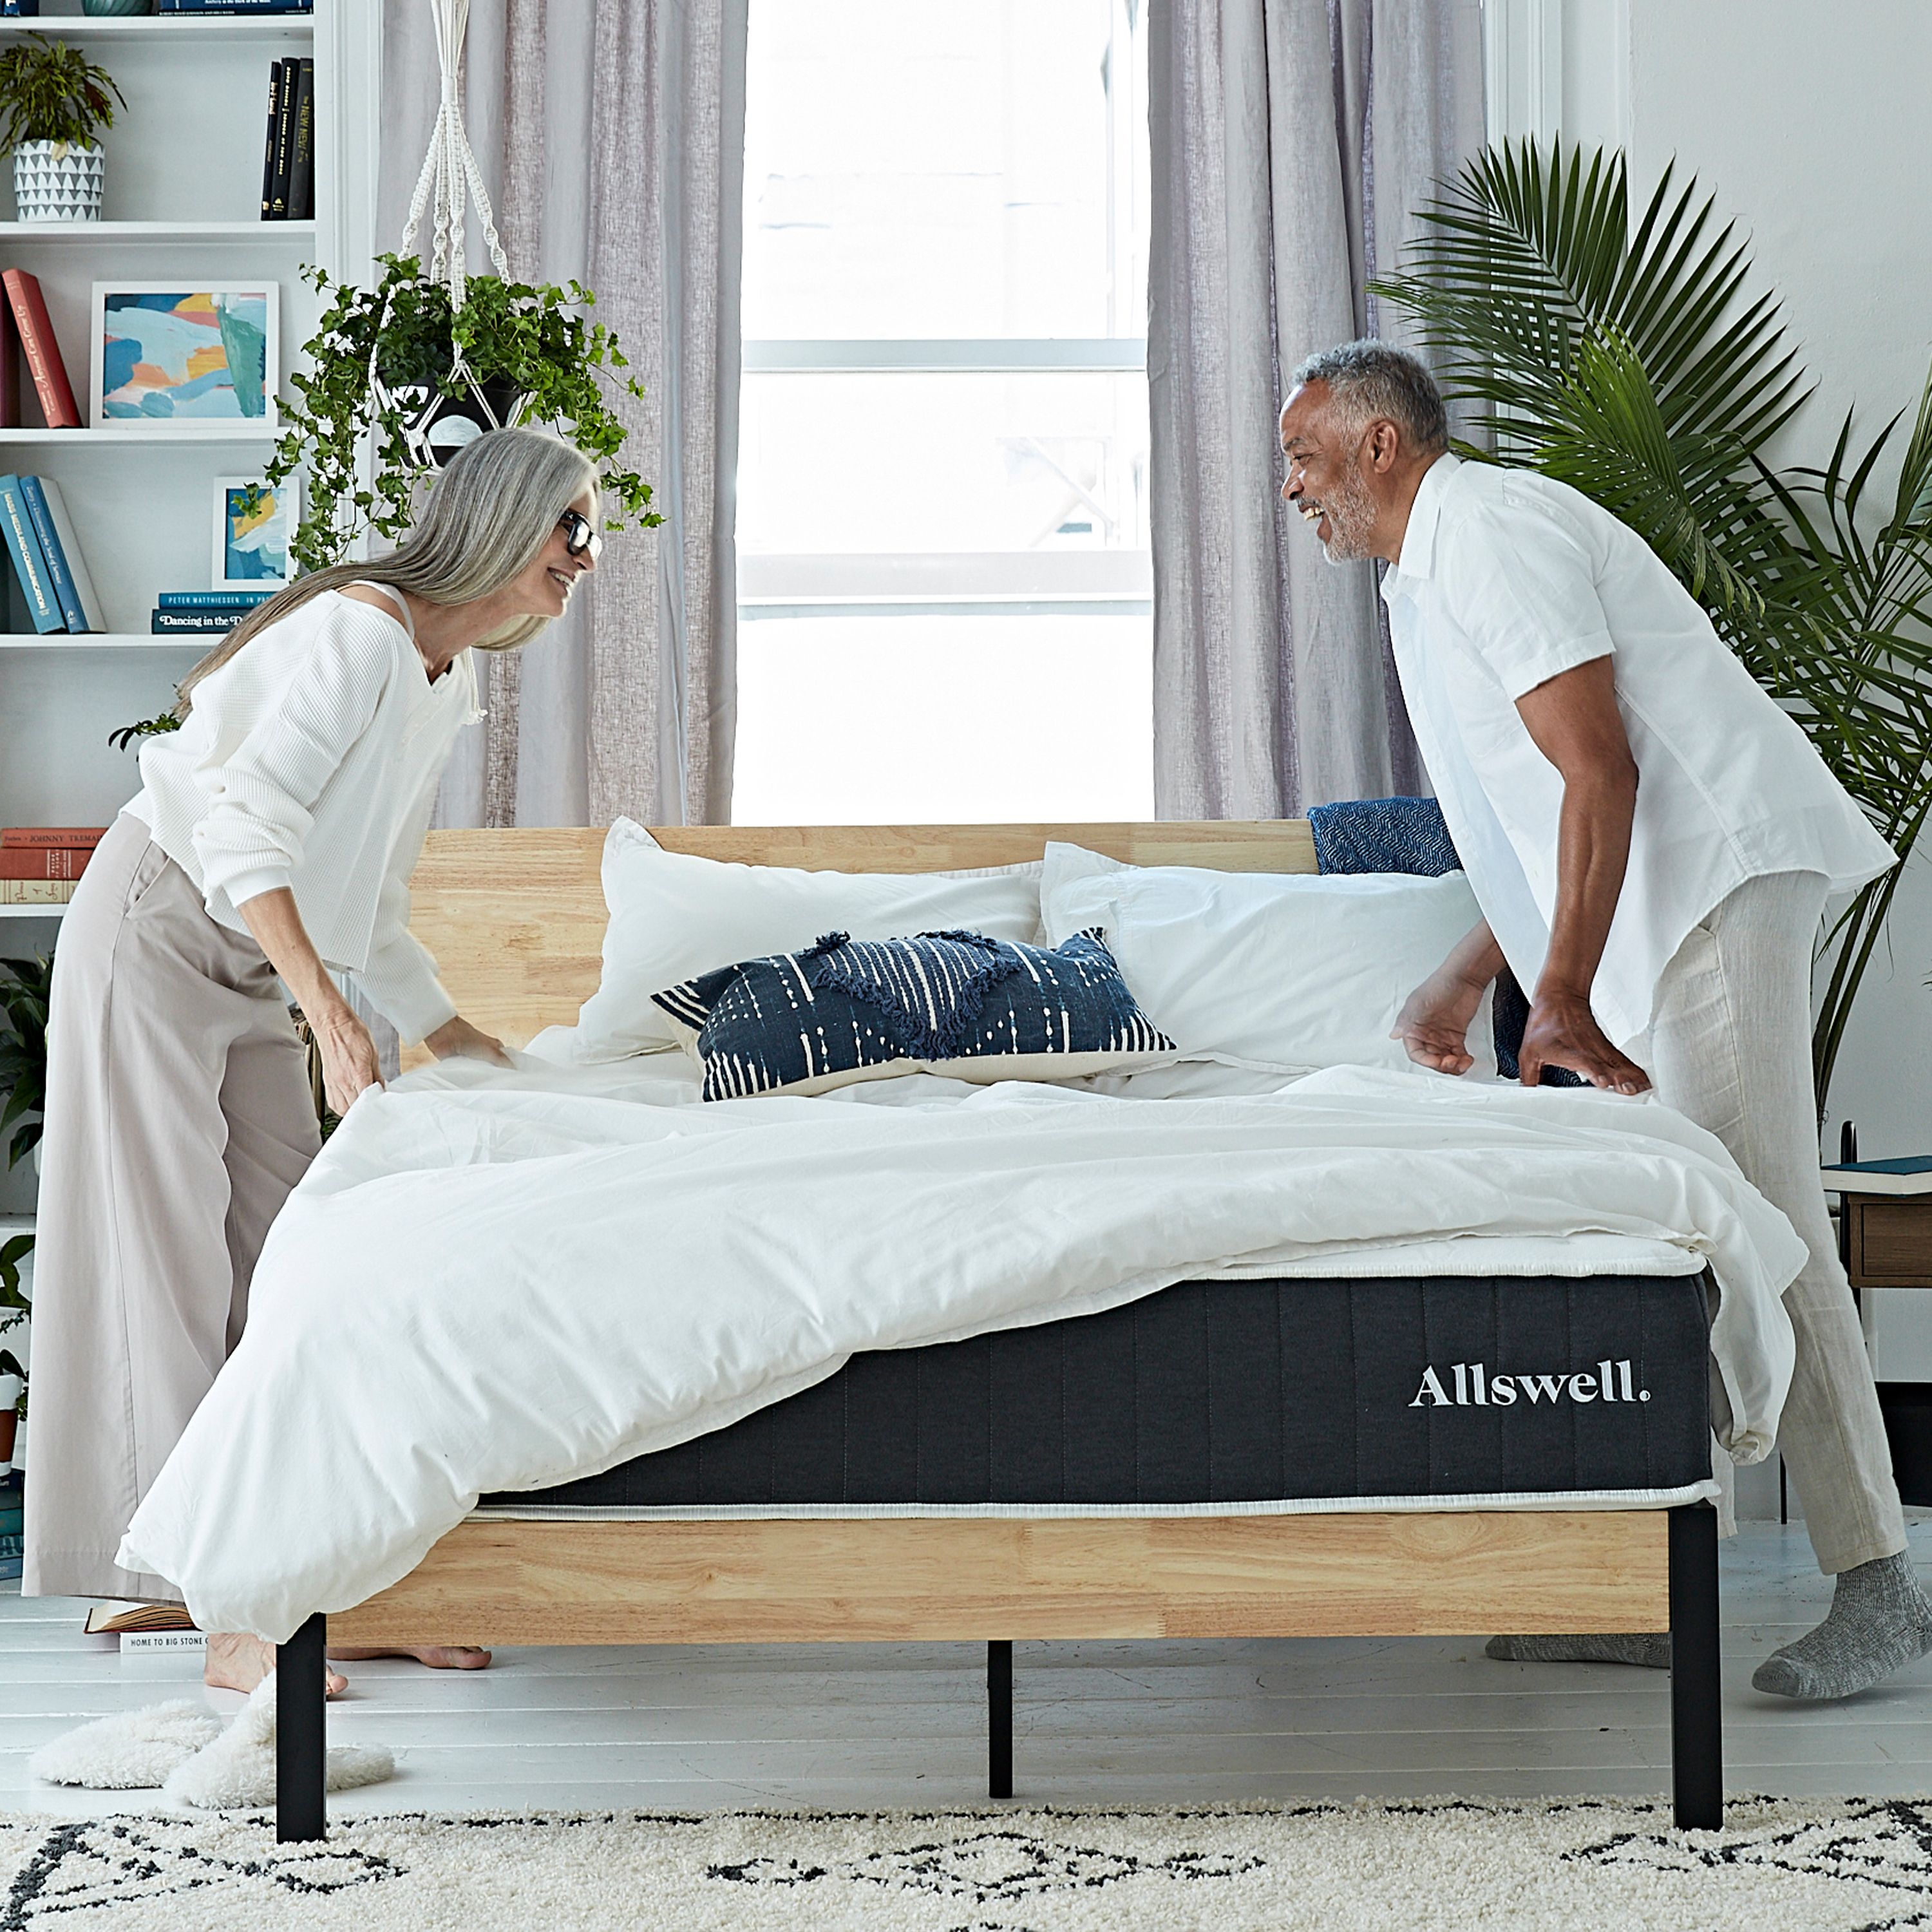 The Original Allswell 10" Bed in a Box Hybrid Mattress, Queen - image 2 of 8